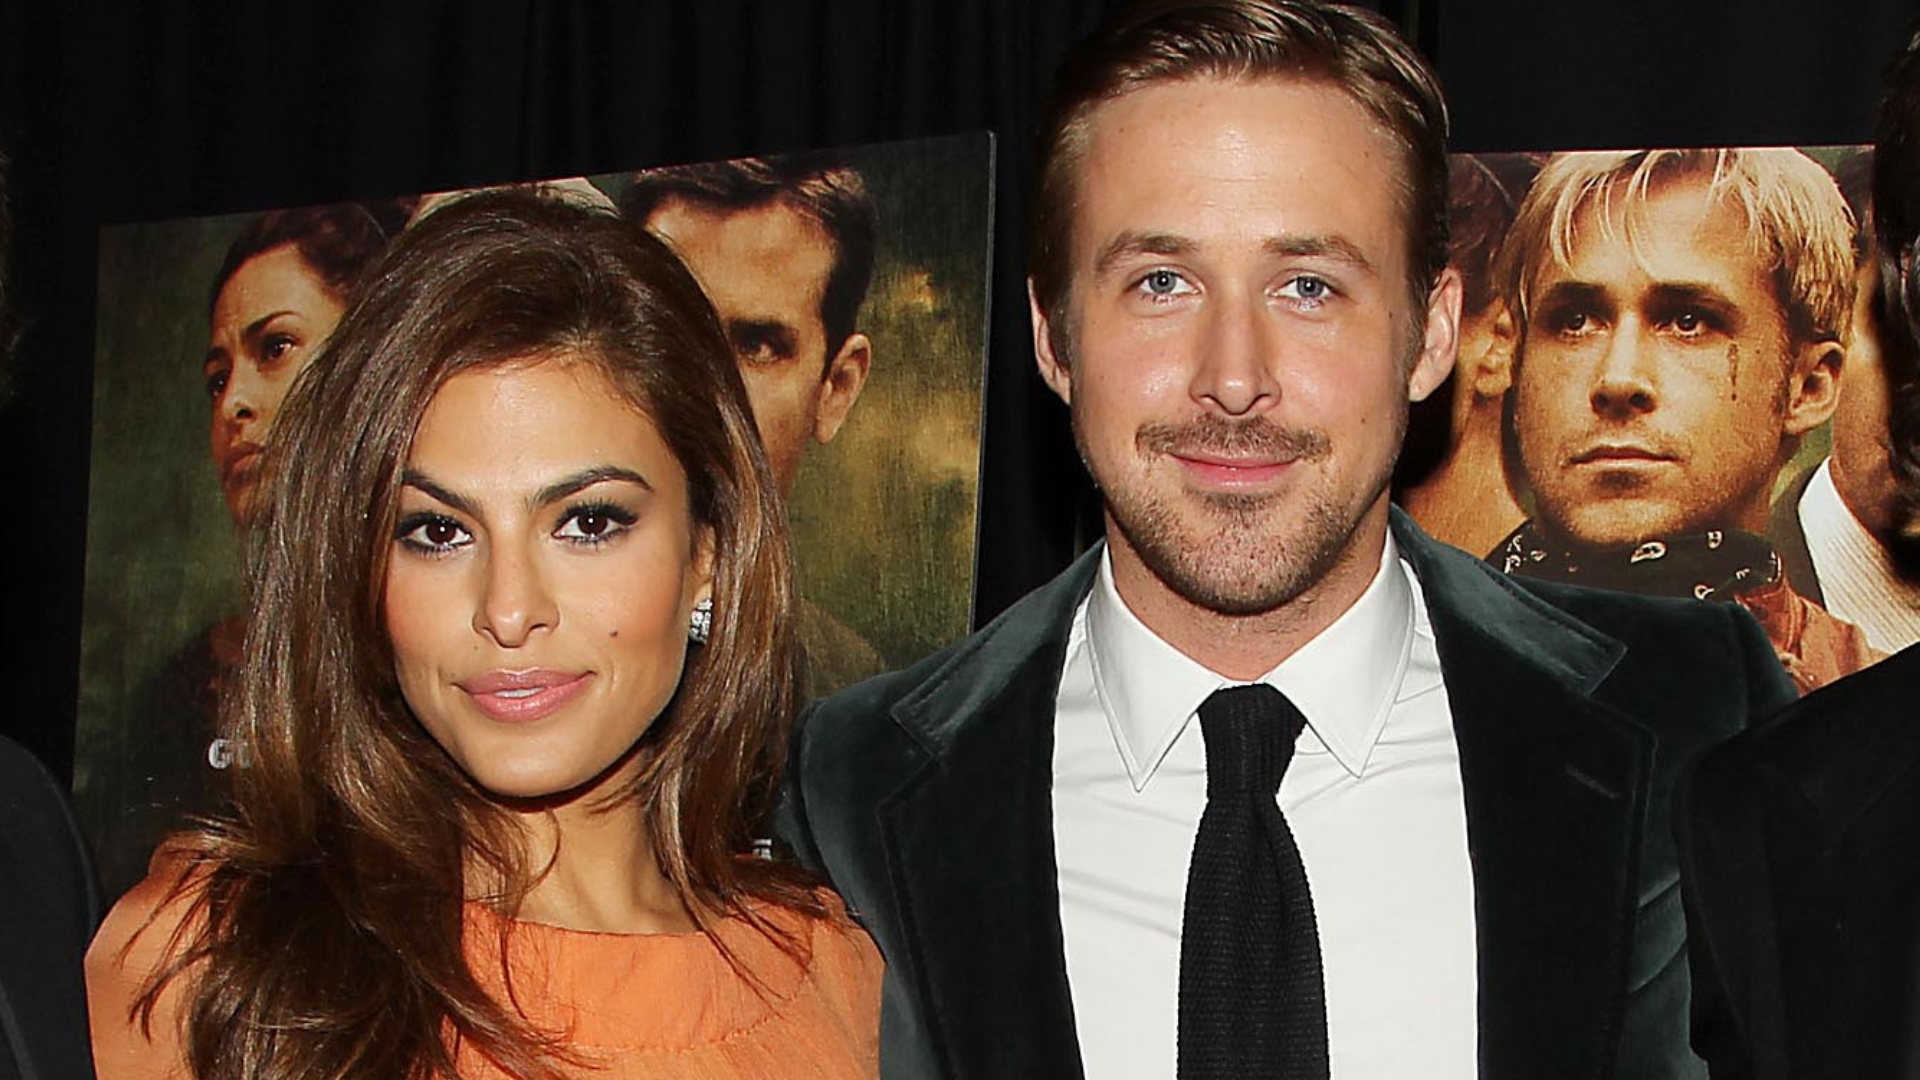 Ryan Gosling and Eva Mendes Kids And Wedding Get Public Bust Up! Latest Updates